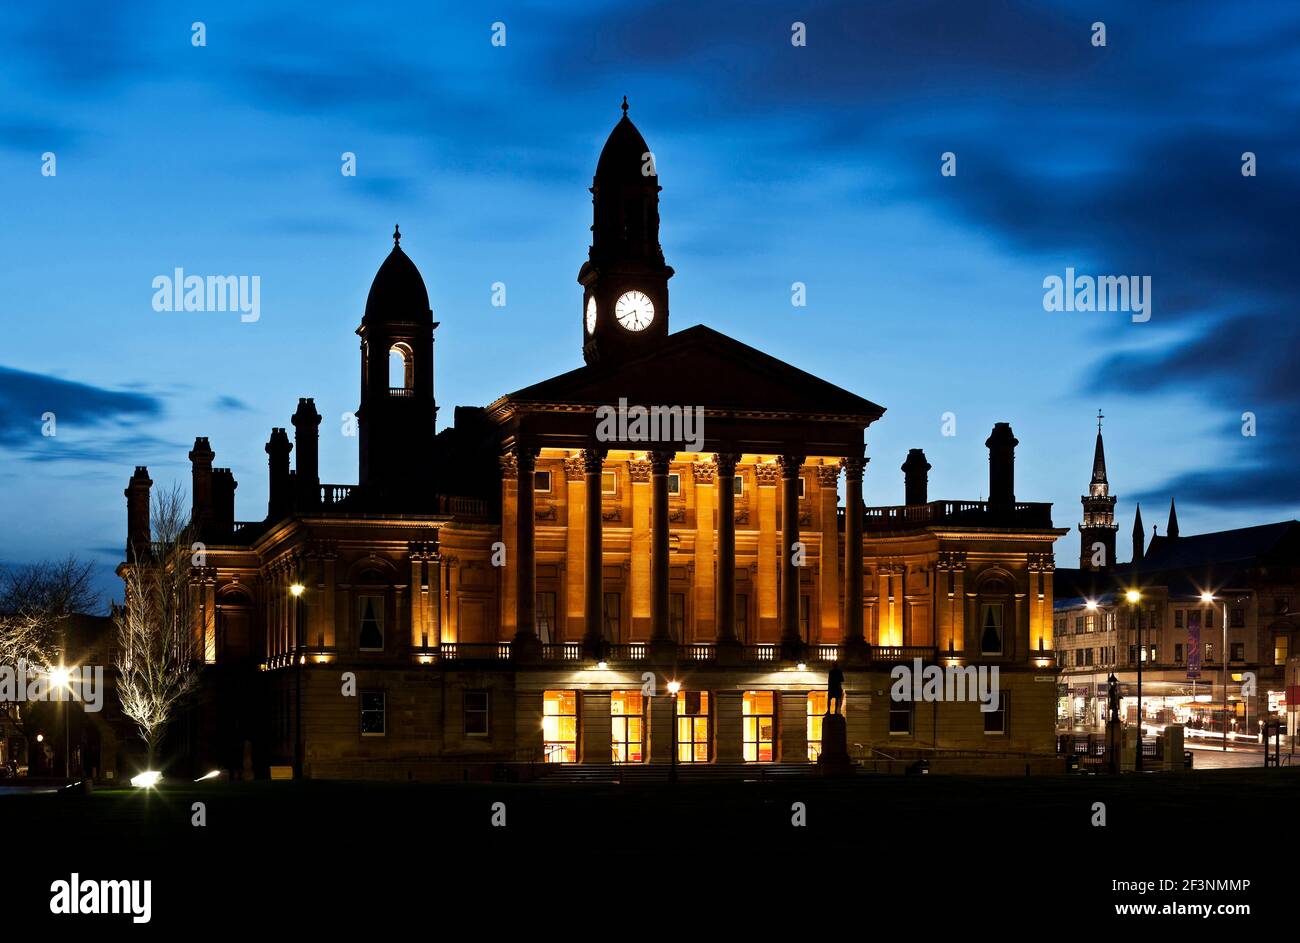 Paisley Town Hall. A 19th century building in the classical style, lit up at night. Towers and spires outlined against the night sky. Stock Photo